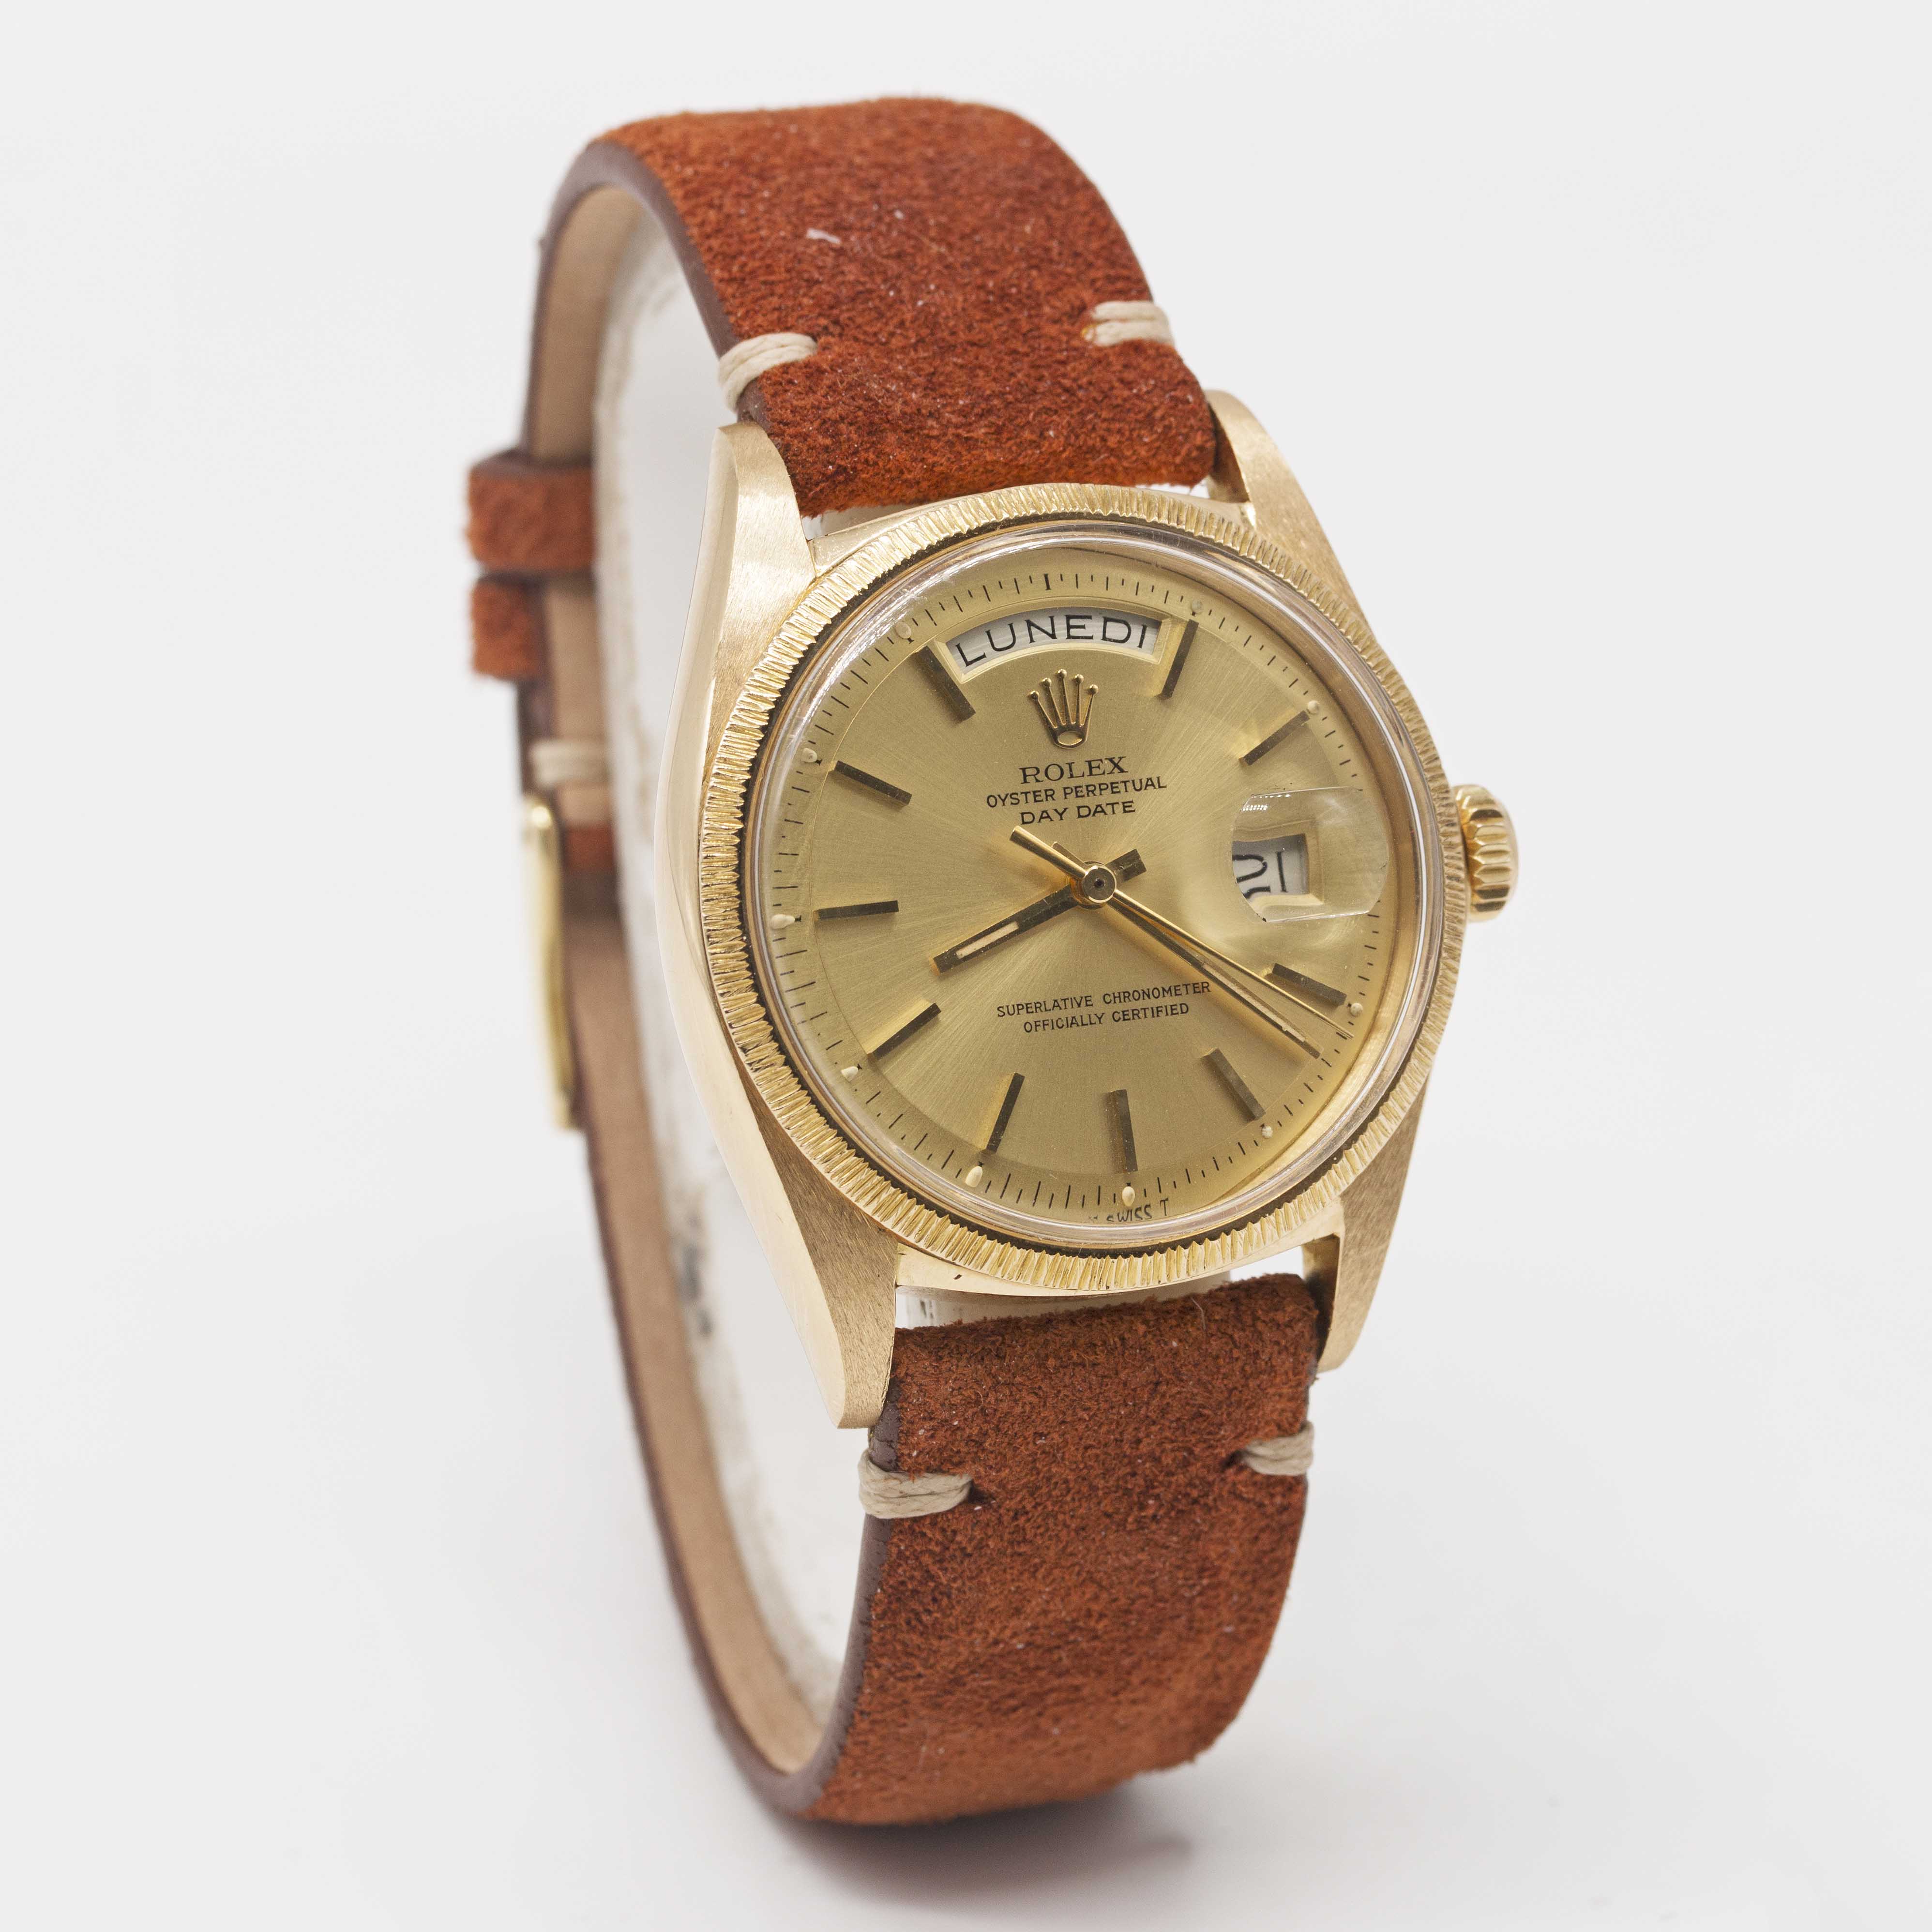 A GENTLEMAN'S 18K SOLID YELLOW GOLD ROLEX OYSTER PERPETUAL DAY DATE WRIST WATCH CIRCA 1971, REF. - Image 4 of 6